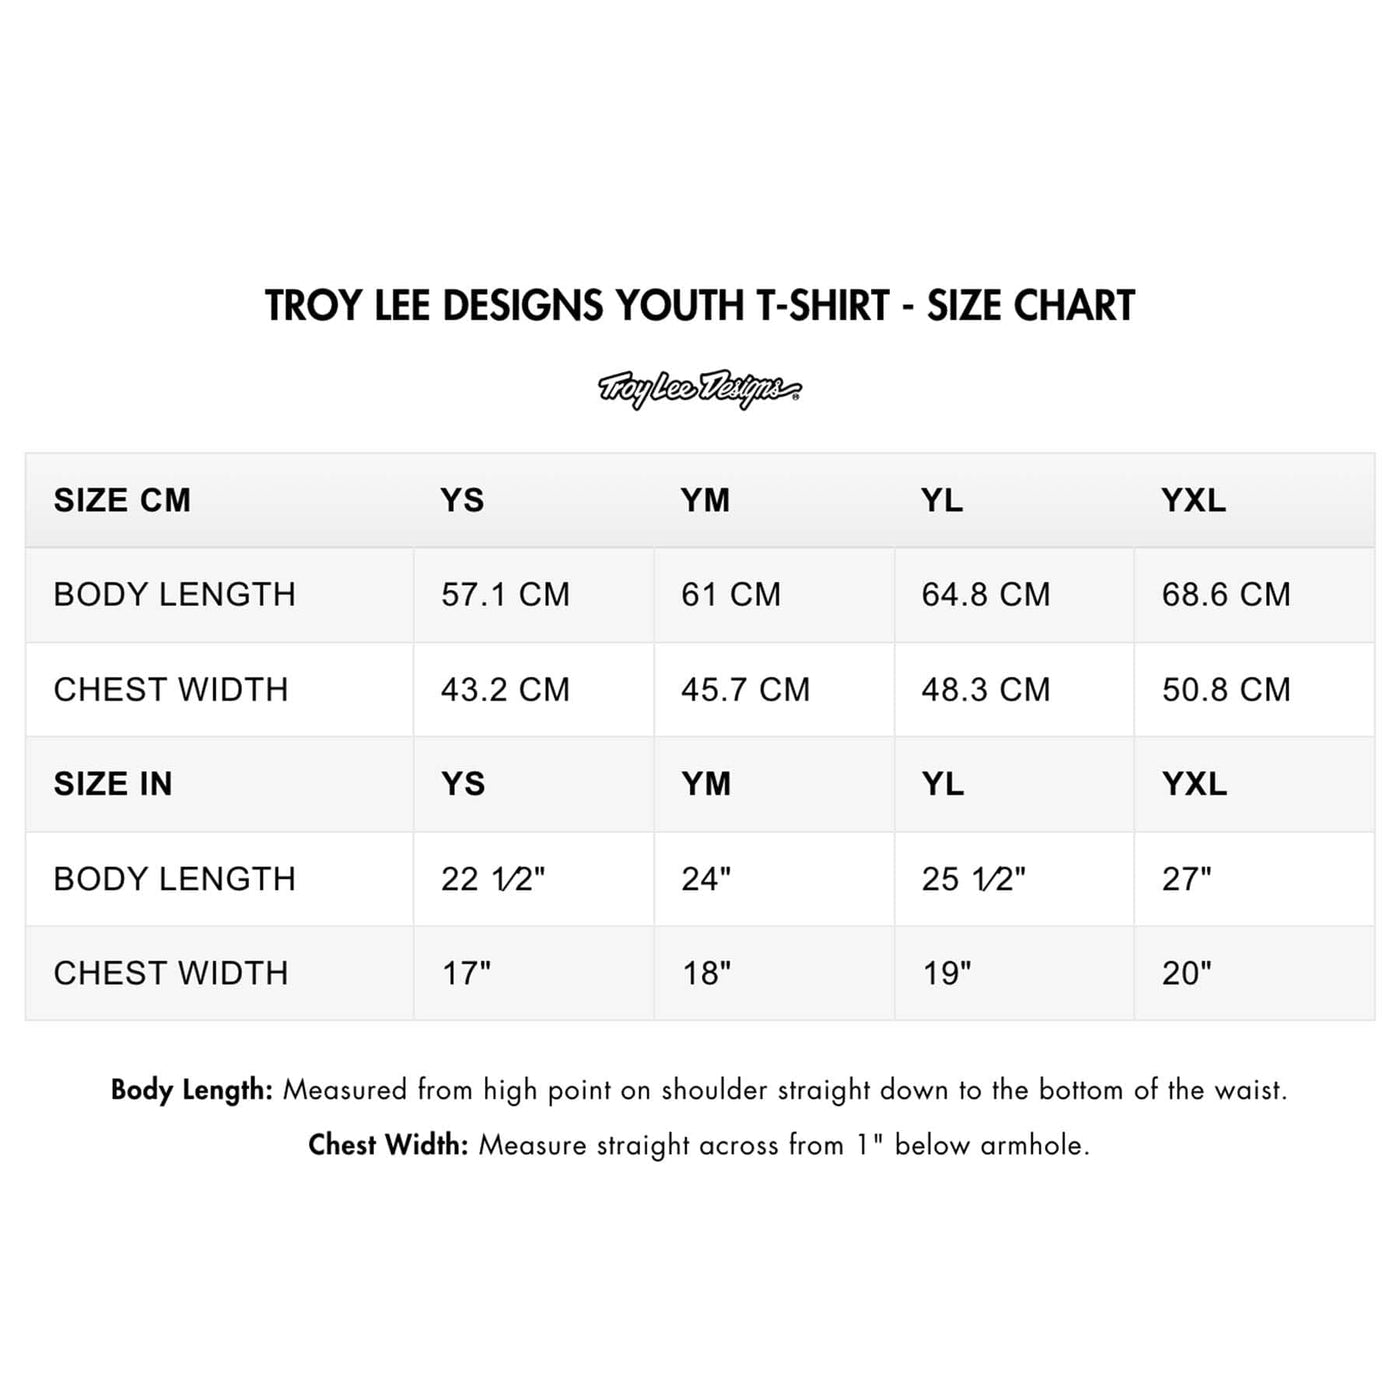 TROY LEE DESIGNS YOUTH T-SHIRT - SIZE CHART | 8Lines.eu - Fast Delivery, Great deals!